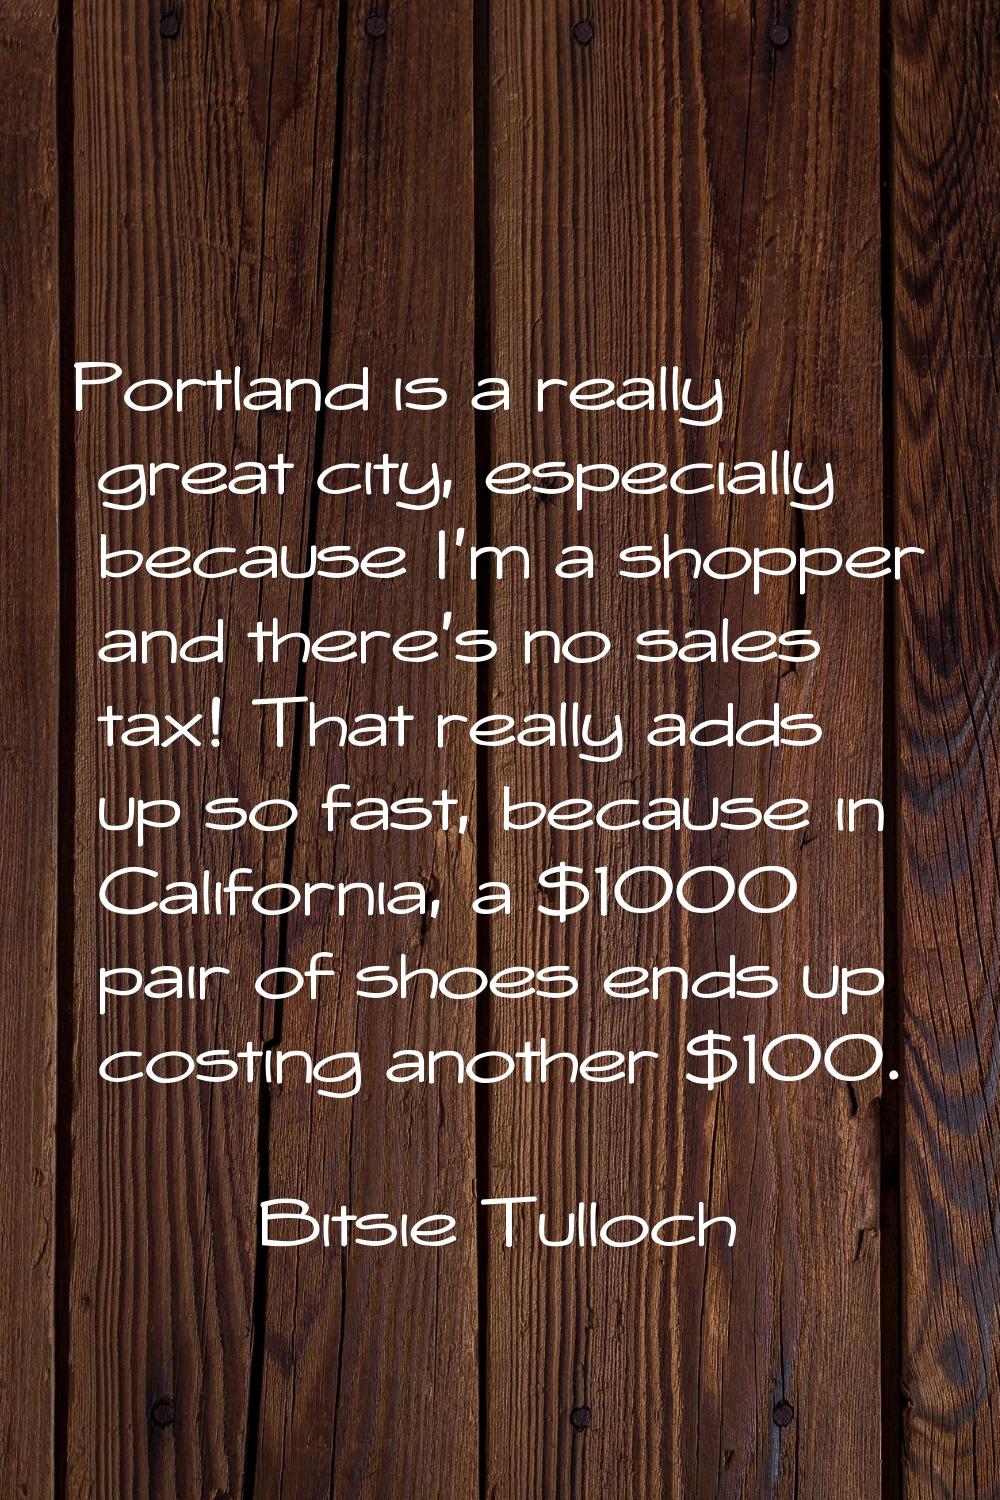 Portland is a really great city, especially because I'm a shopper and there's no sales tax! That re